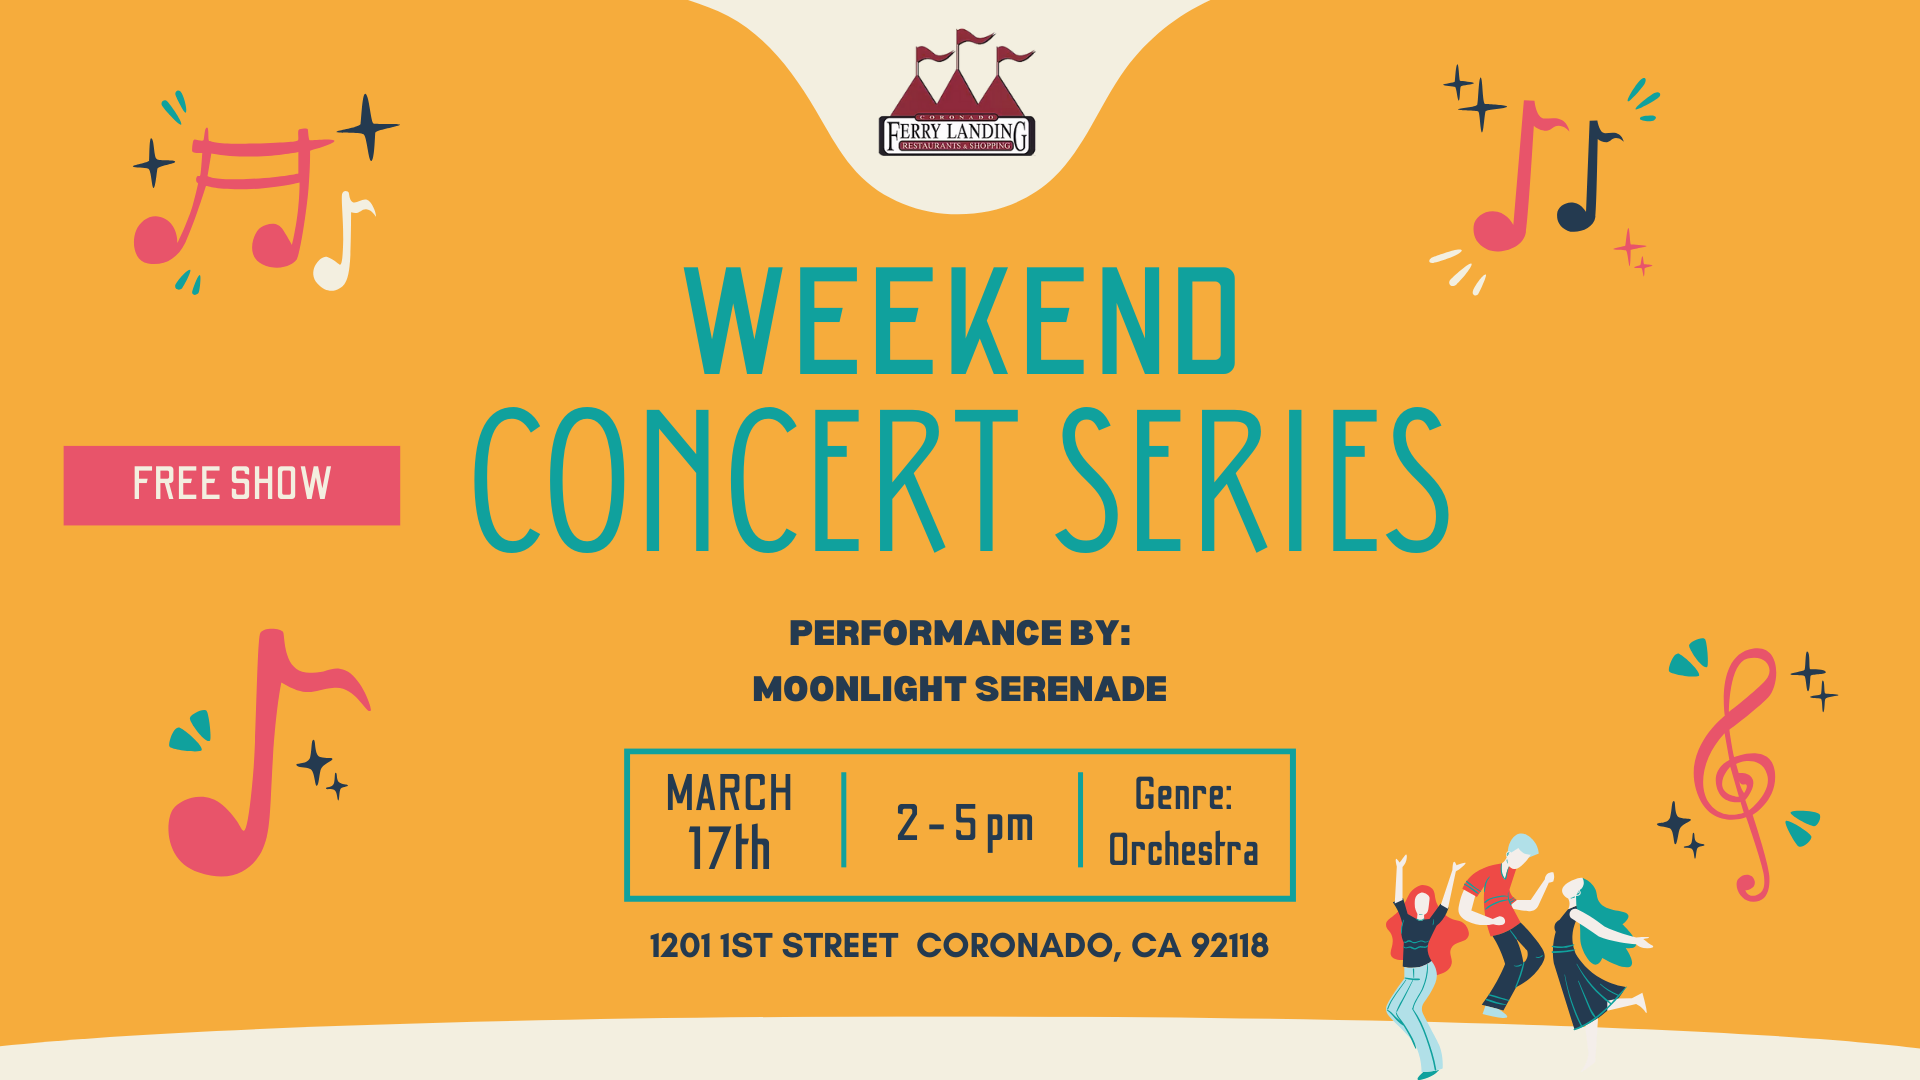 A vibrant orange poster for the 'Weekend Concert Series' at Ferry Landing featuring MOONLIGHT SERENADE on March 17th from 2-5 pm. The genre is Orchestra. Essential event details are included, such as the venue address at 1201 1st Street Coronado, CA 92118, and the poster highlights a 'FREE SHOW' in a blue banner at the bottom. Decorative elements like musical notes, confetti, and dancing people silhouettes enhance the poster's celebratory feel.